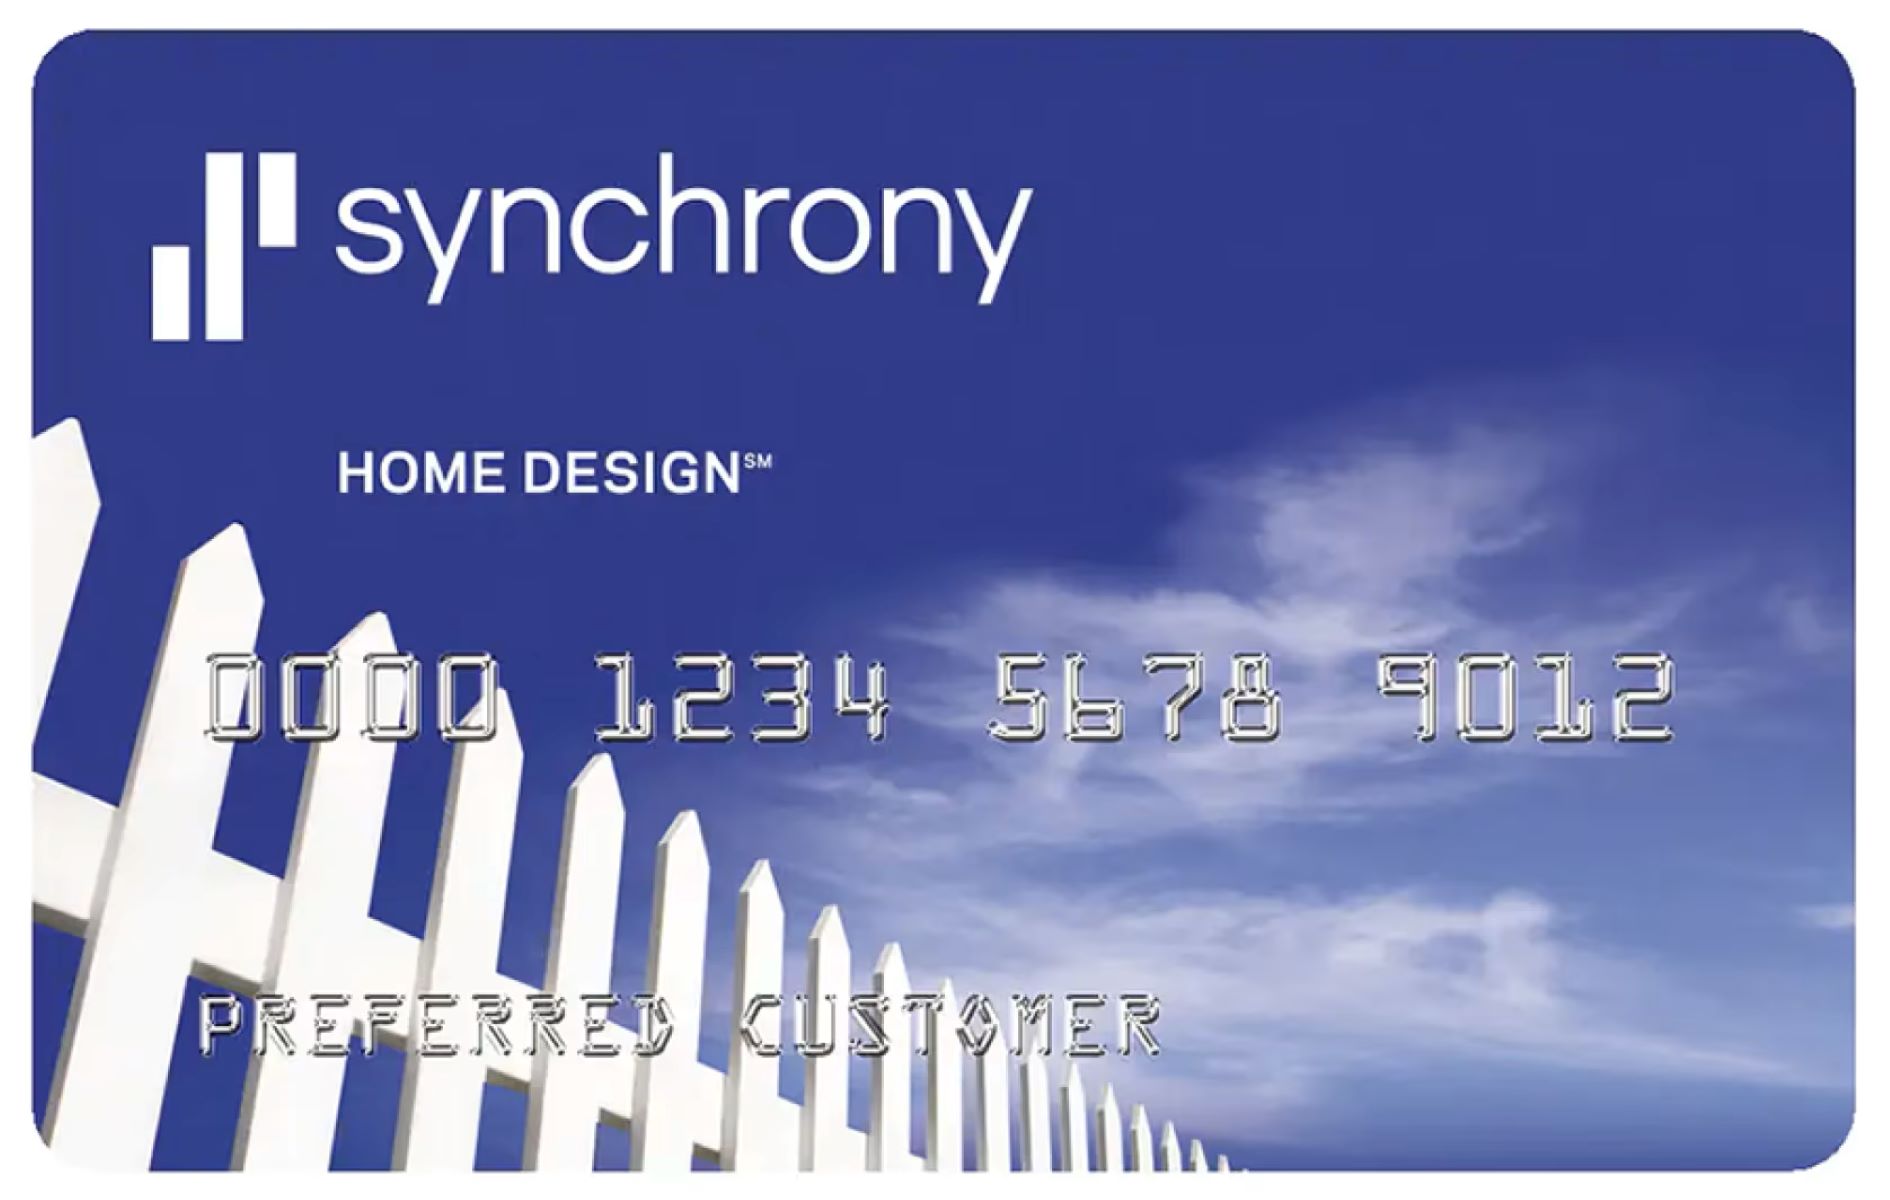 Where Can I Use My Synchrony Home Design Credit Card